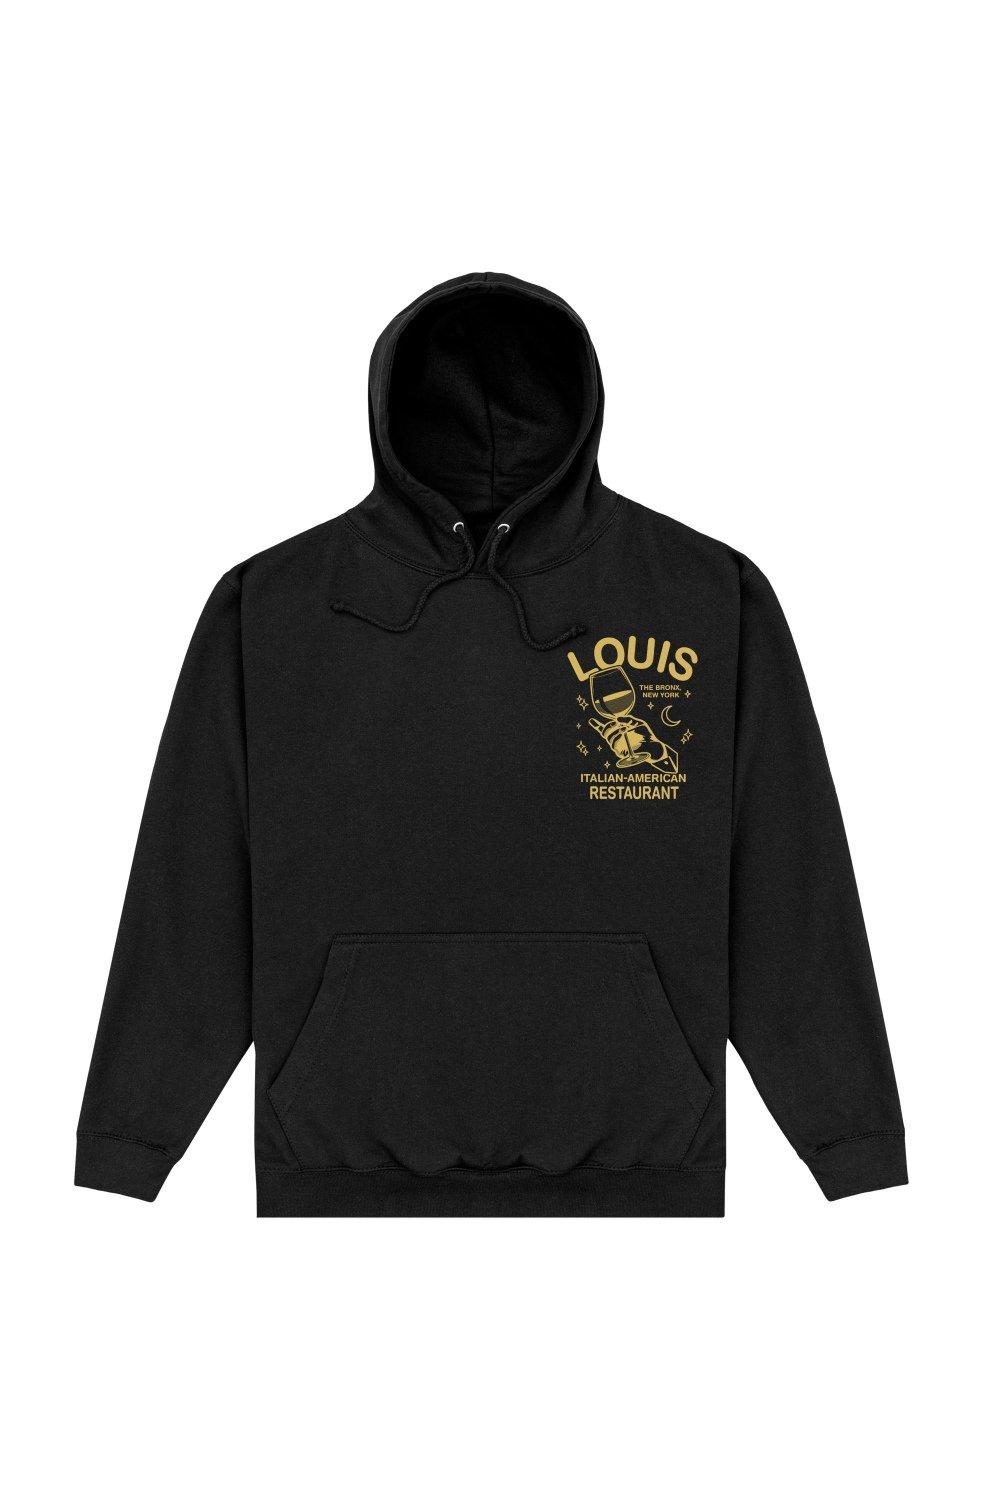 Hoodie Limited Edition Louis Restaurant Gold